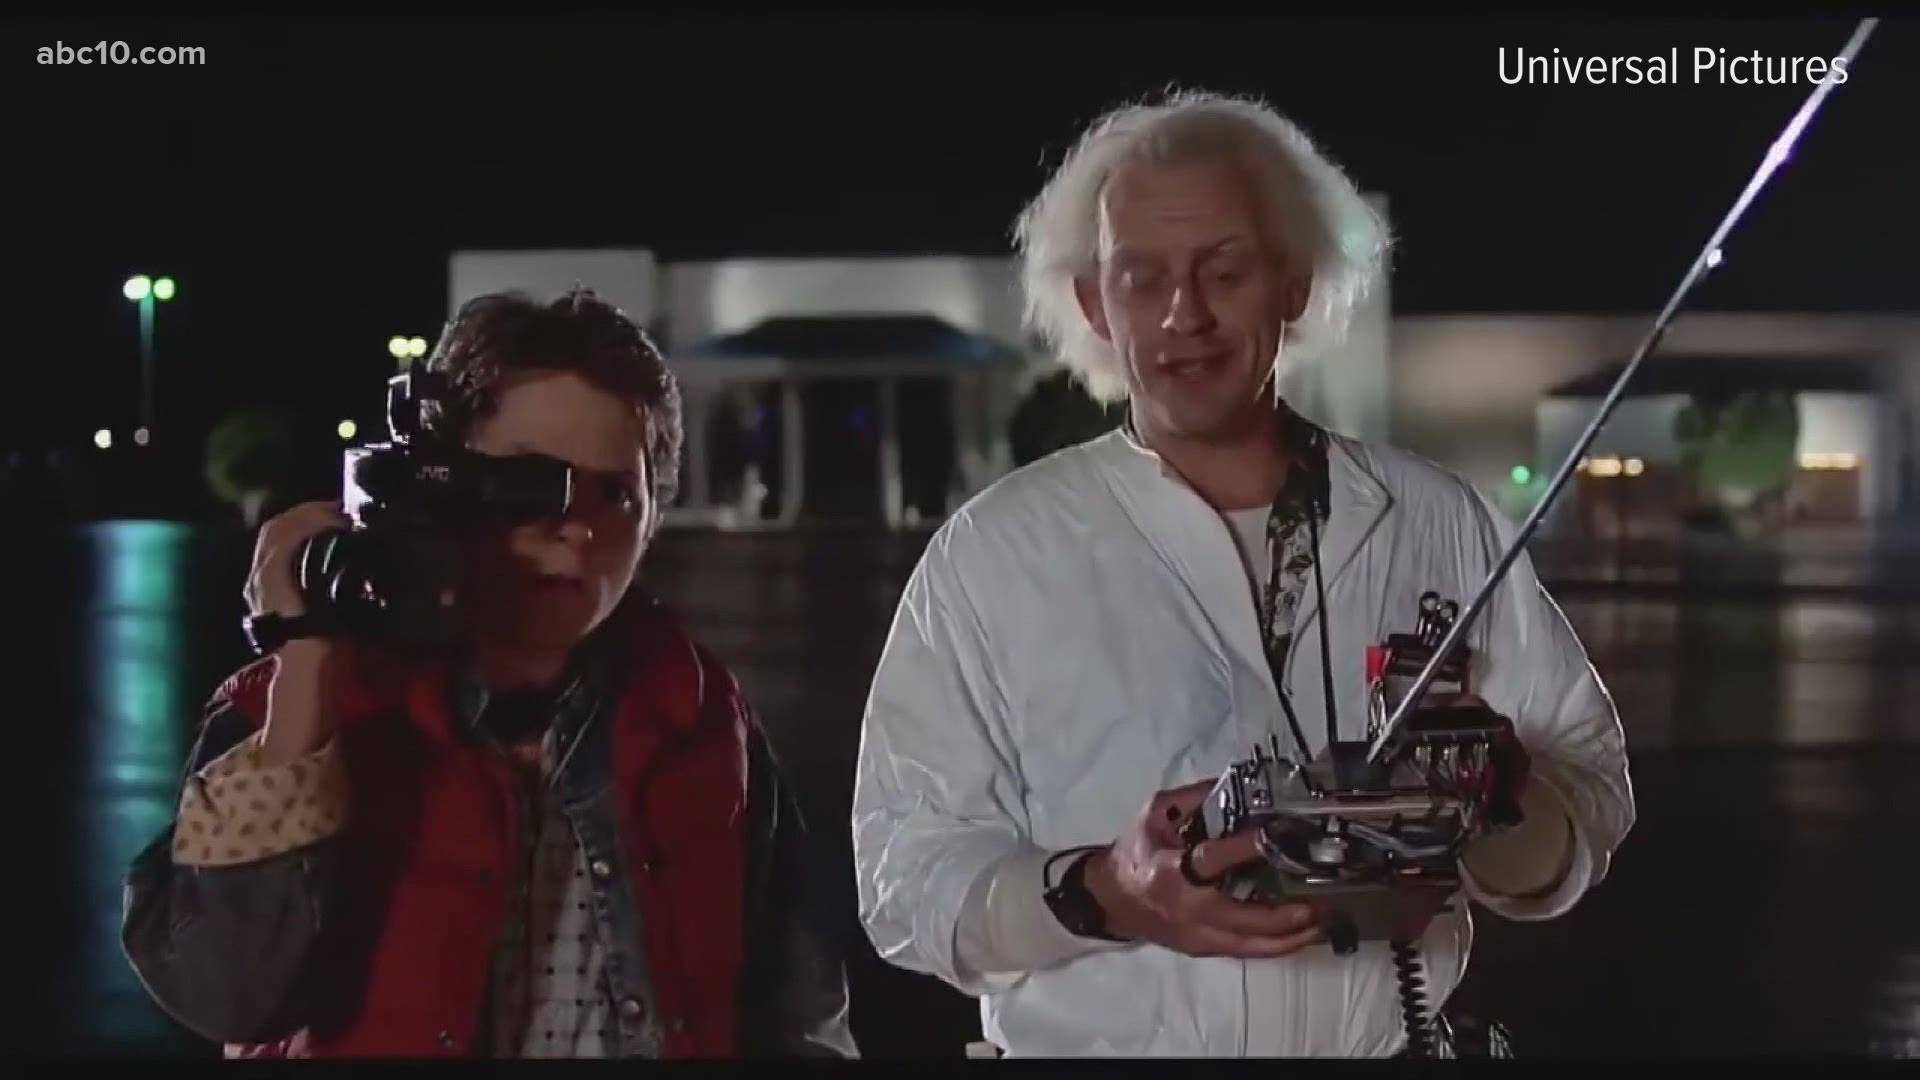 Happy 'Back to the Future' Day. Celebrate with Stage Nine in Old Sacramento this weekend.